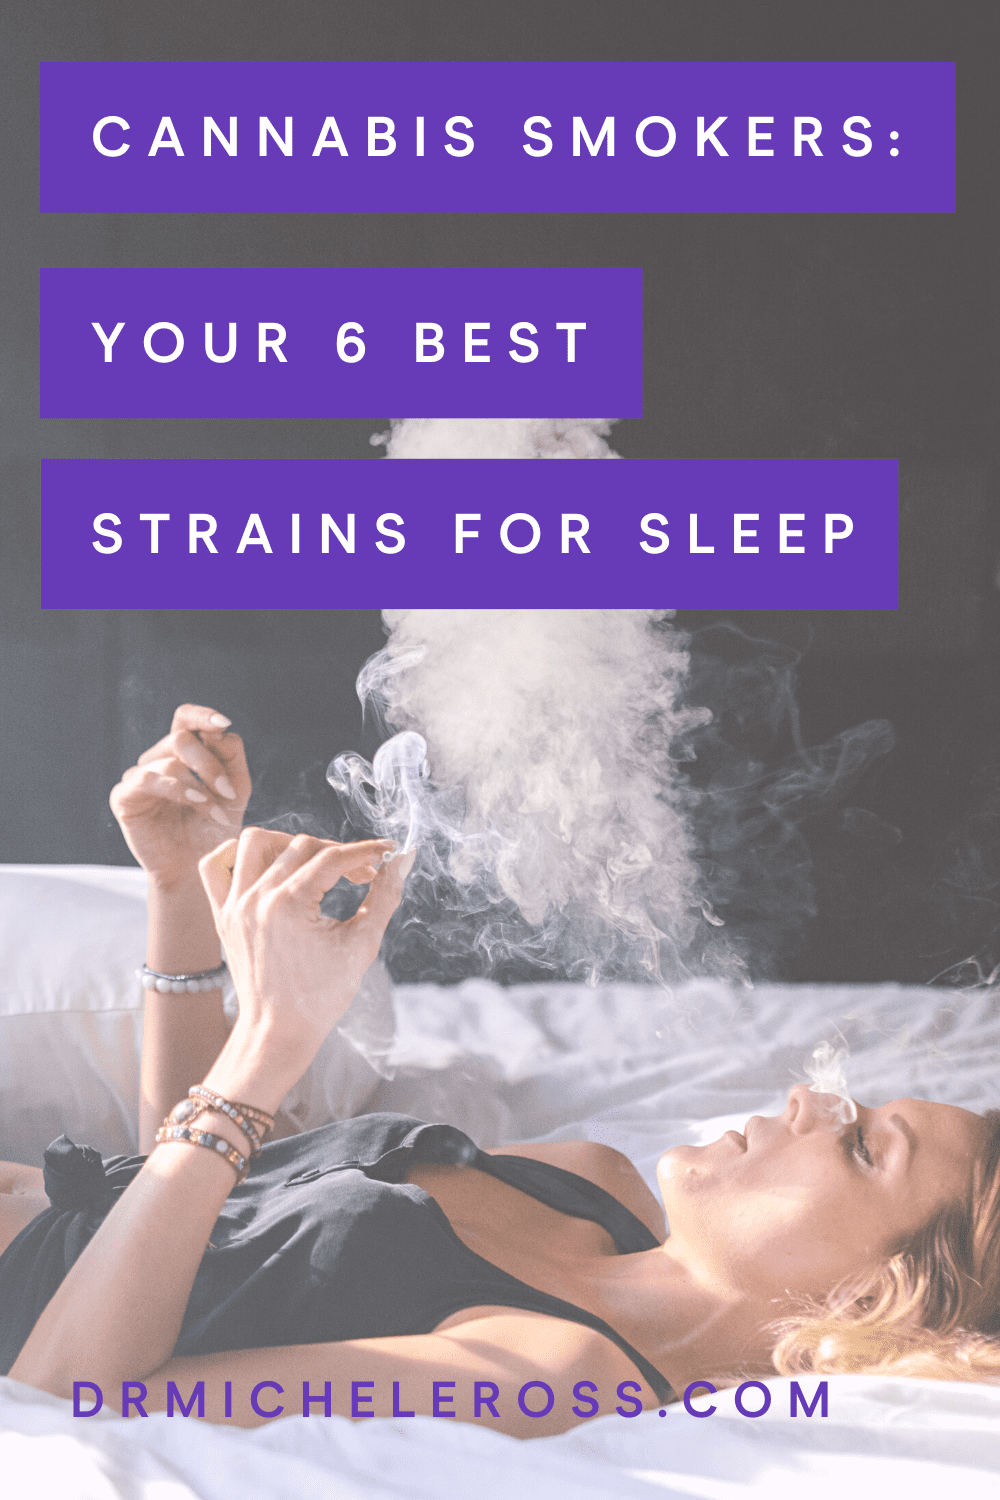 Cannabis Smokers: Your 6 Best Strains For Sleep